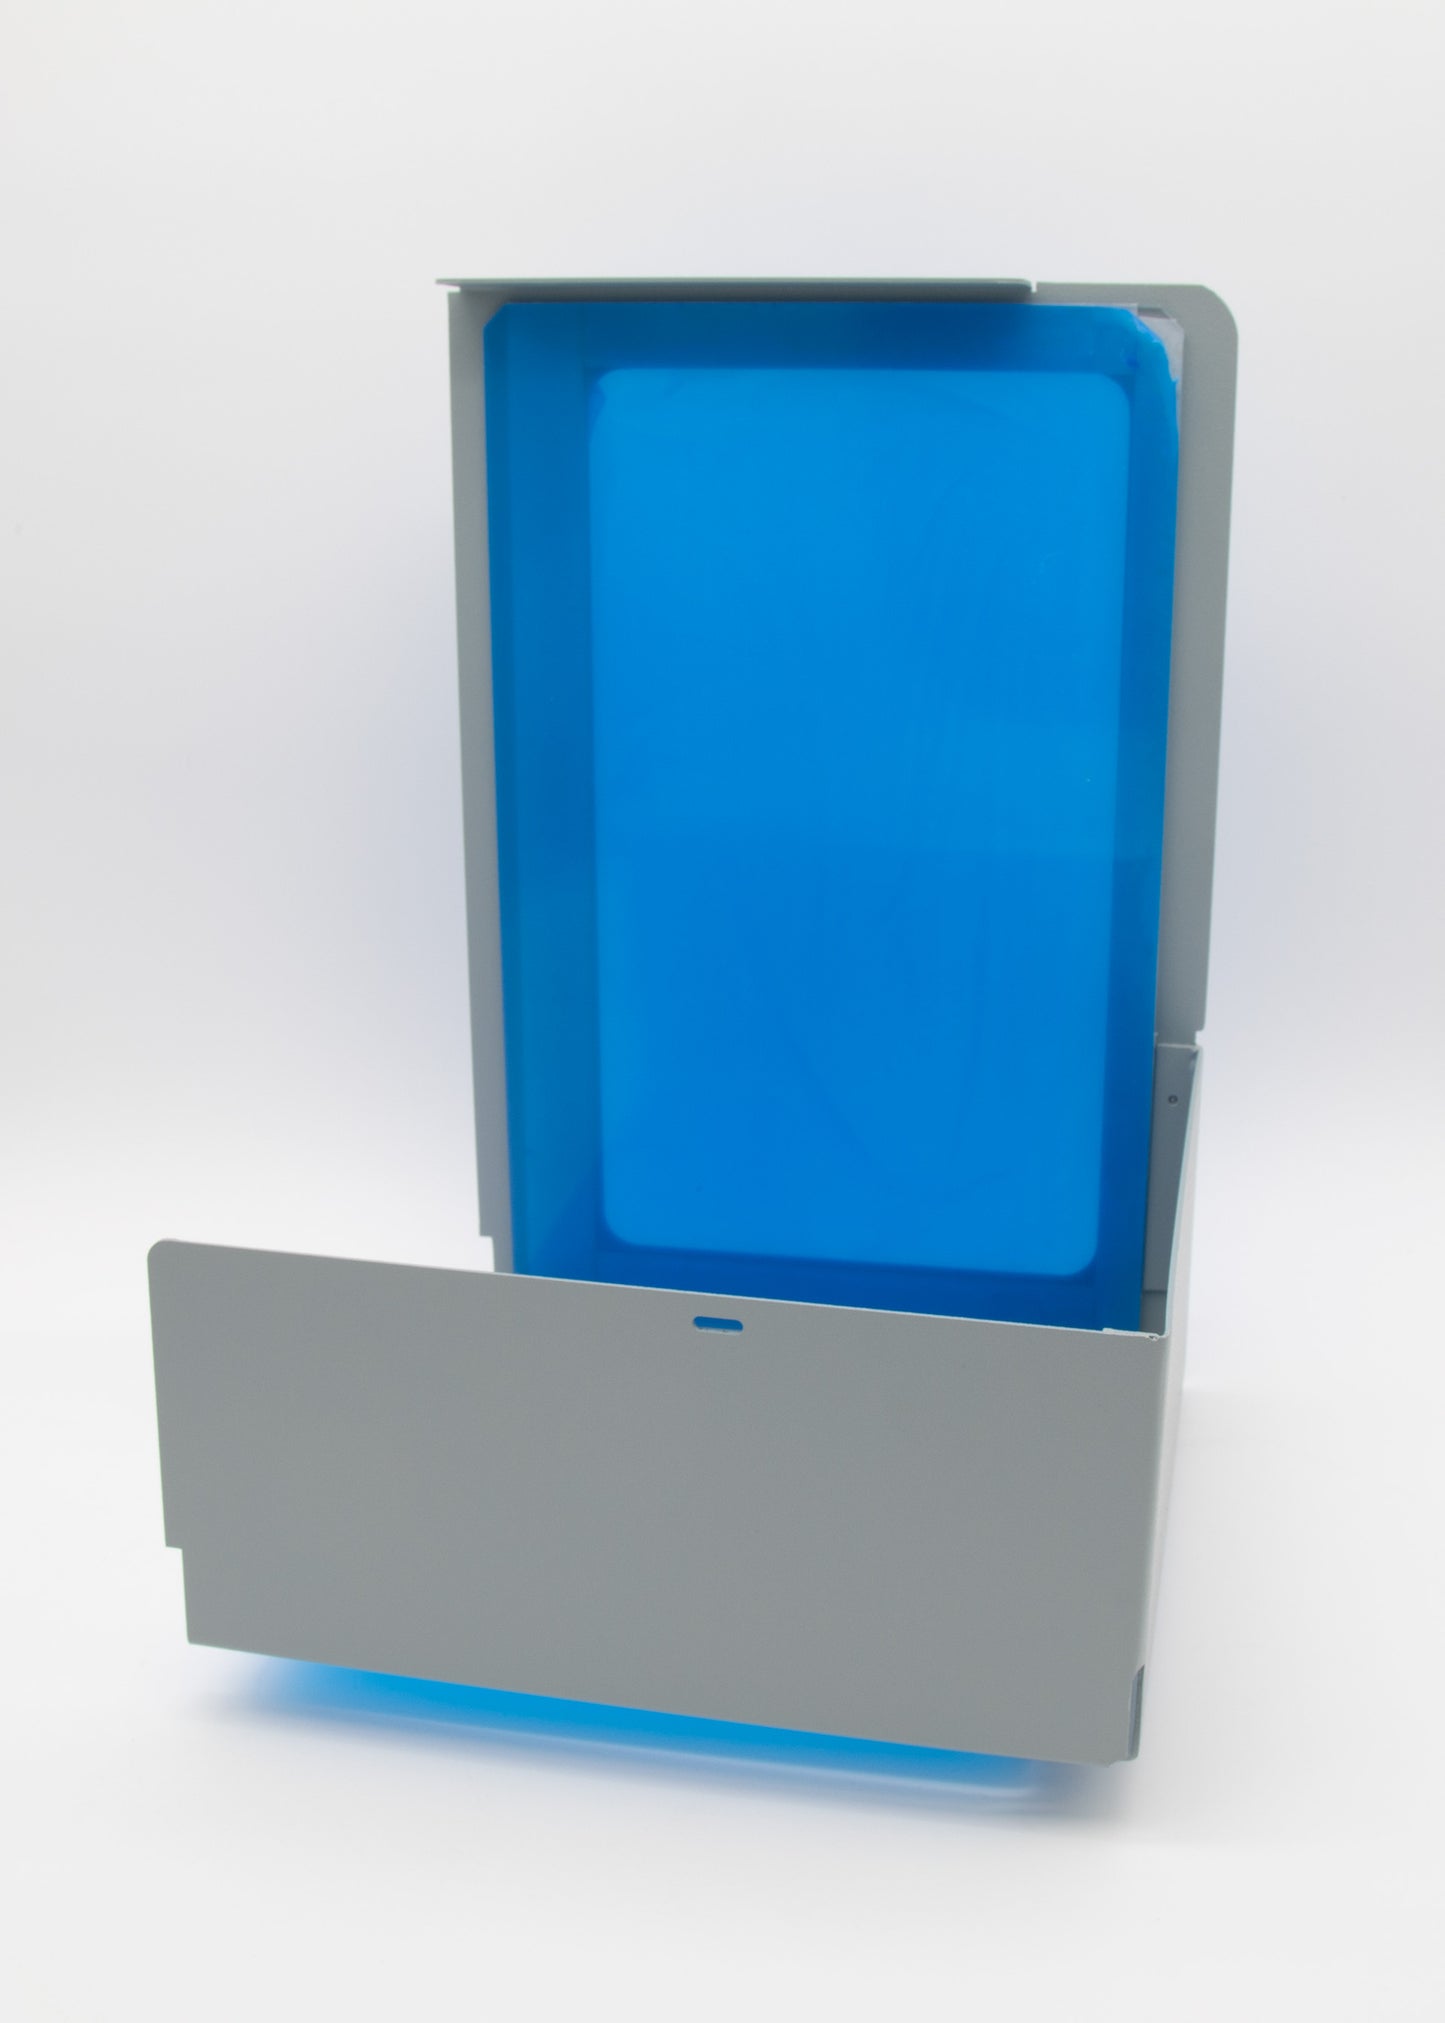 A blue plastic box with a blue cover